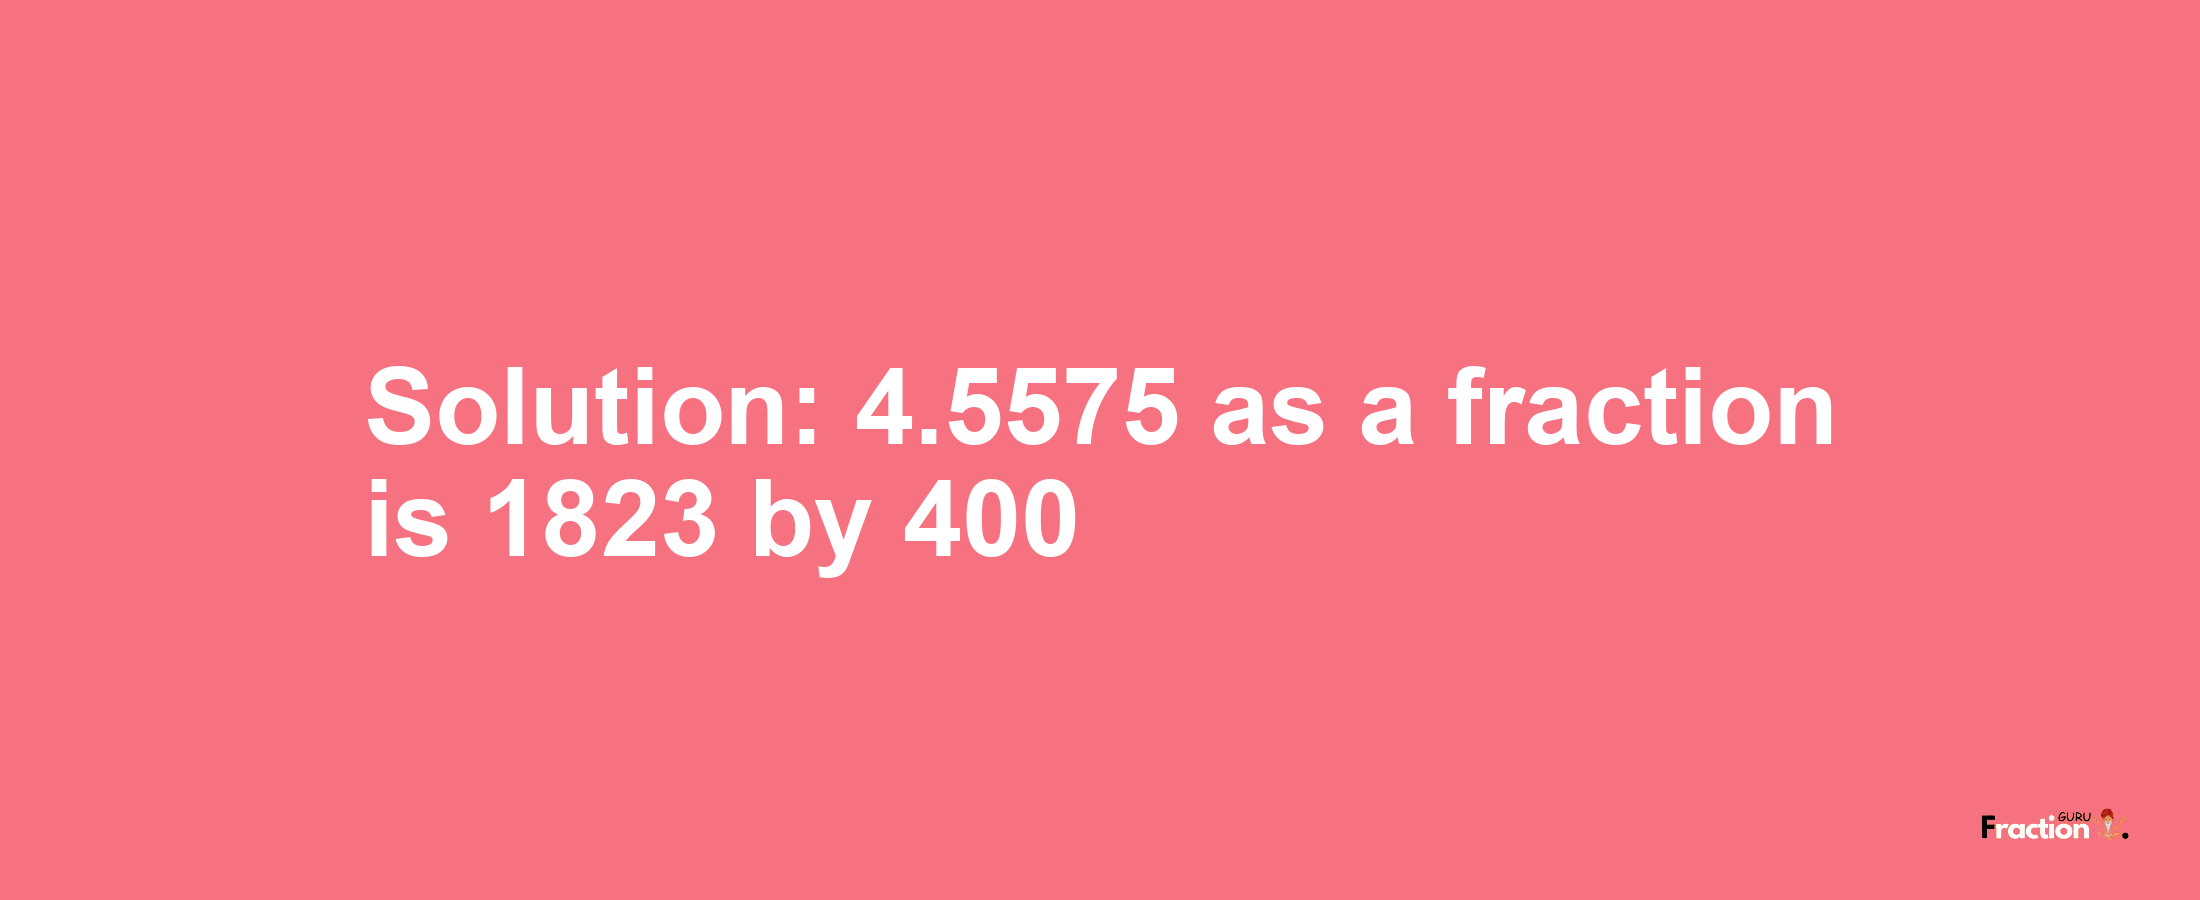 Solution:4.5575 as a fraction is 1823/400